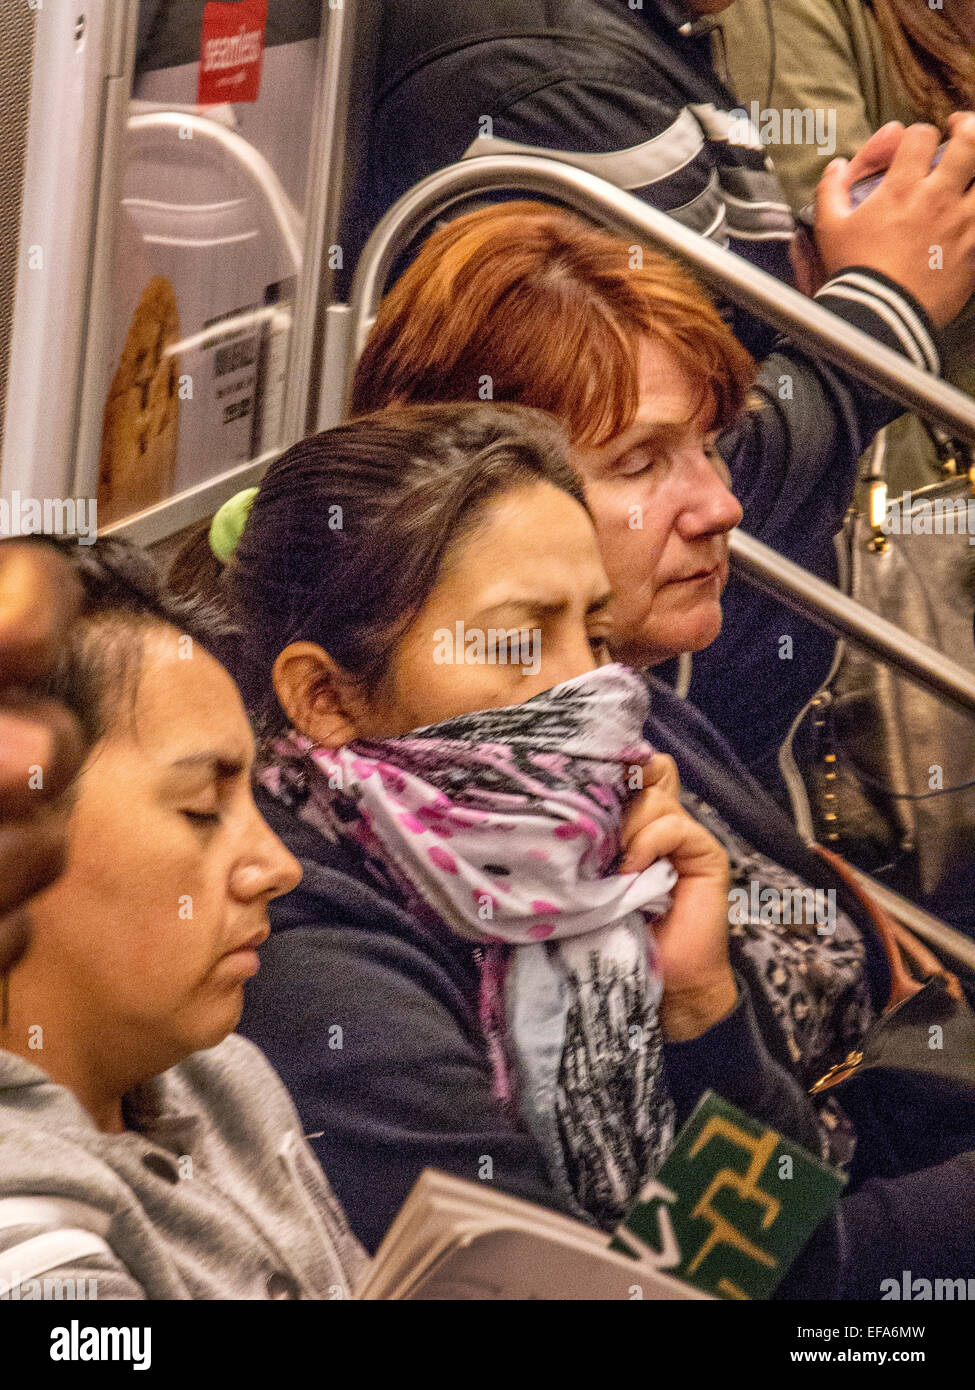 A woman with a cold covers her mouth with a scarf while traveling in a subway car in New York City. Stock Photo